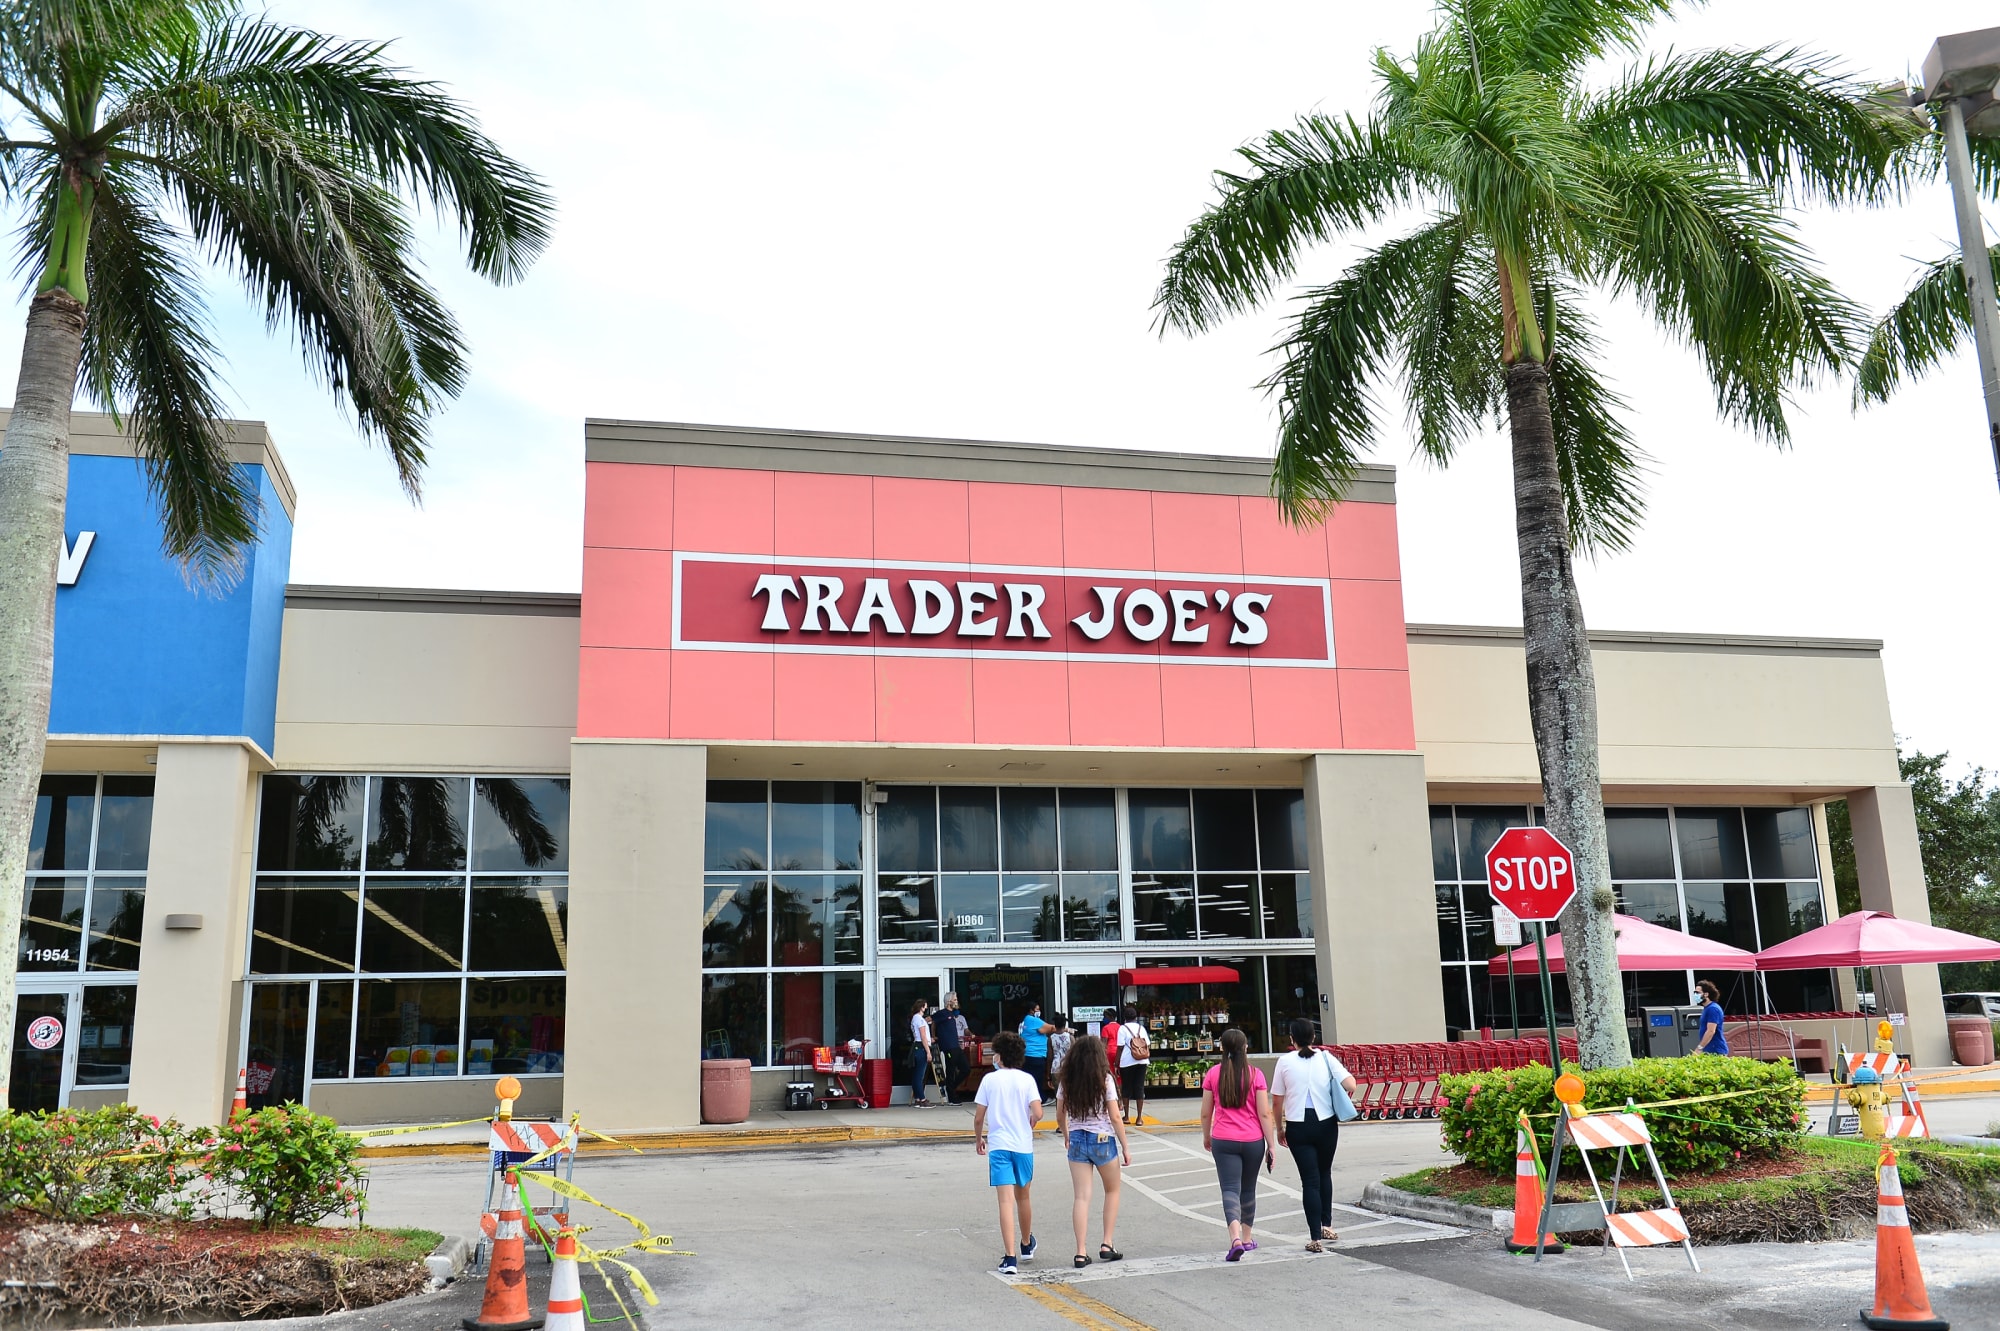 Trader Joe's Is the store open on Thanksgiving Day 2021?